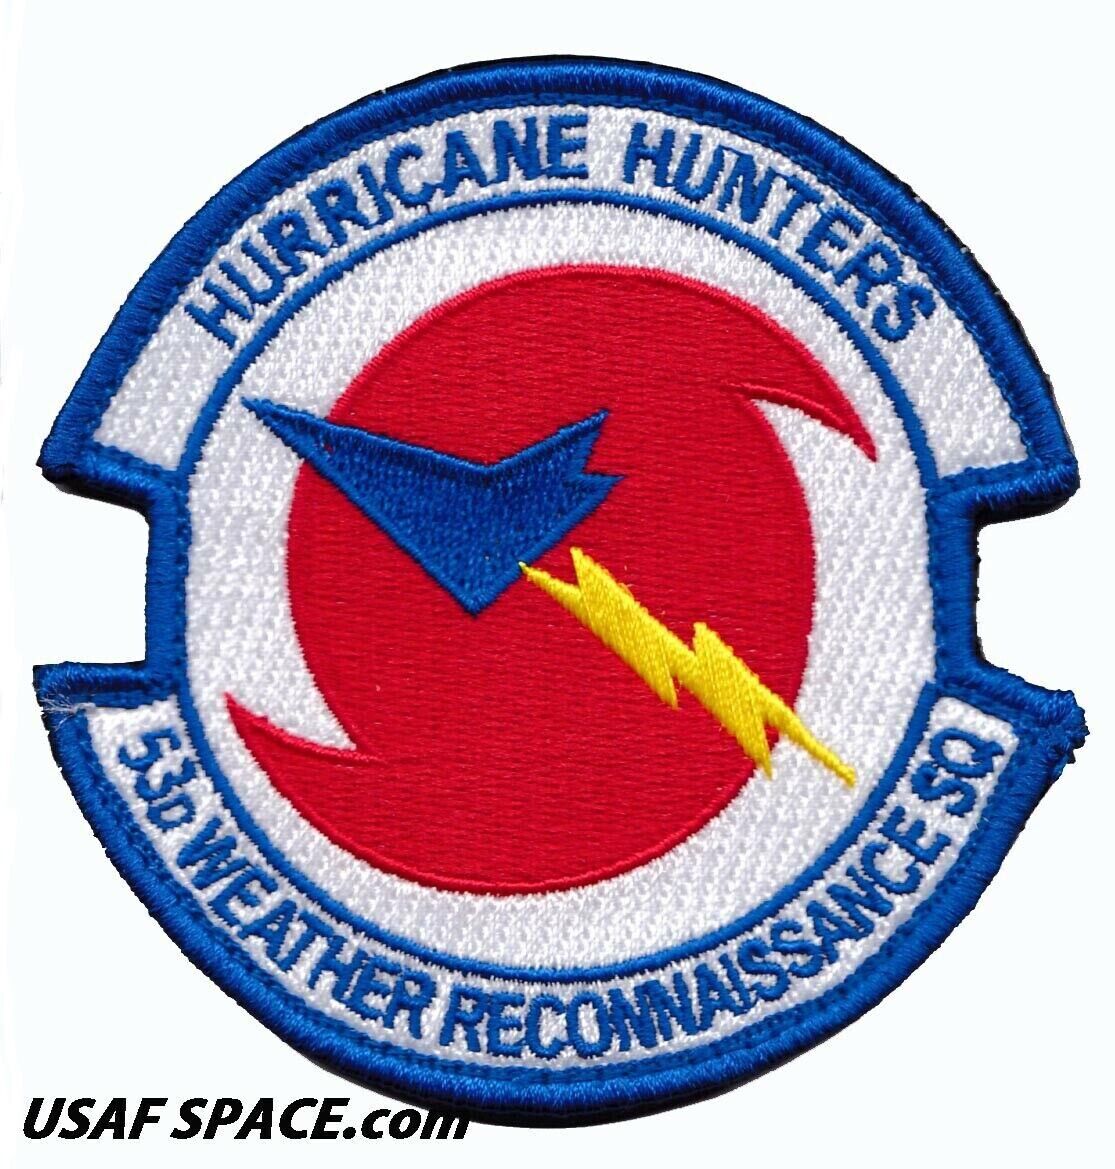 USAF 53rd WEATHER RECONNAISSANCE SQ -HURRICANE HUNTERS- Keesler AFB -VEL PATCH